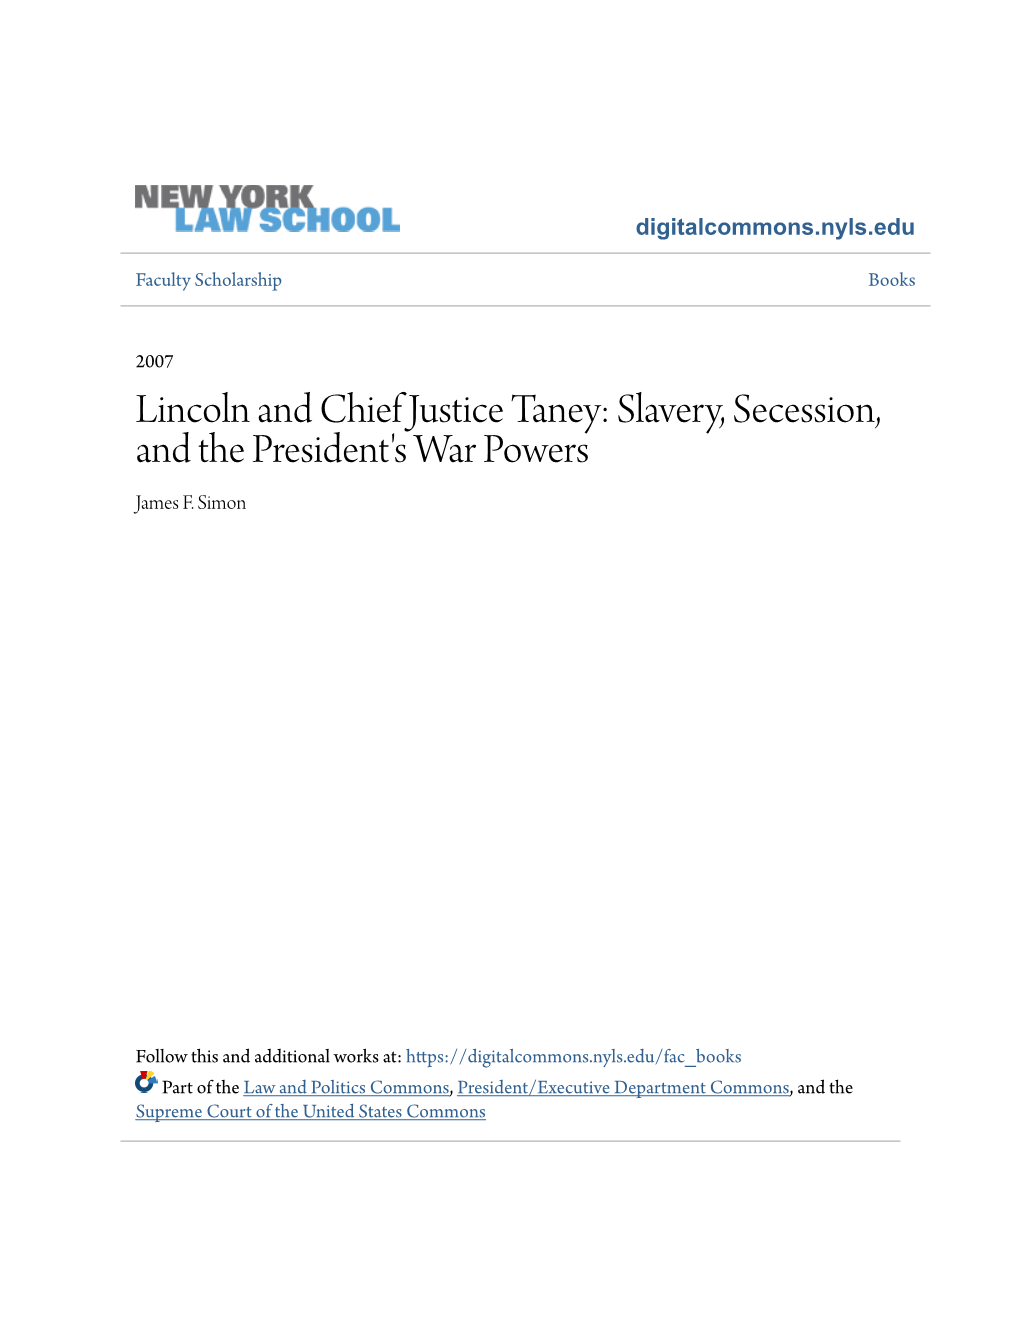 Lincoln and Chief Justice Taney: Slavery, Secession, and the President's War Powers James F